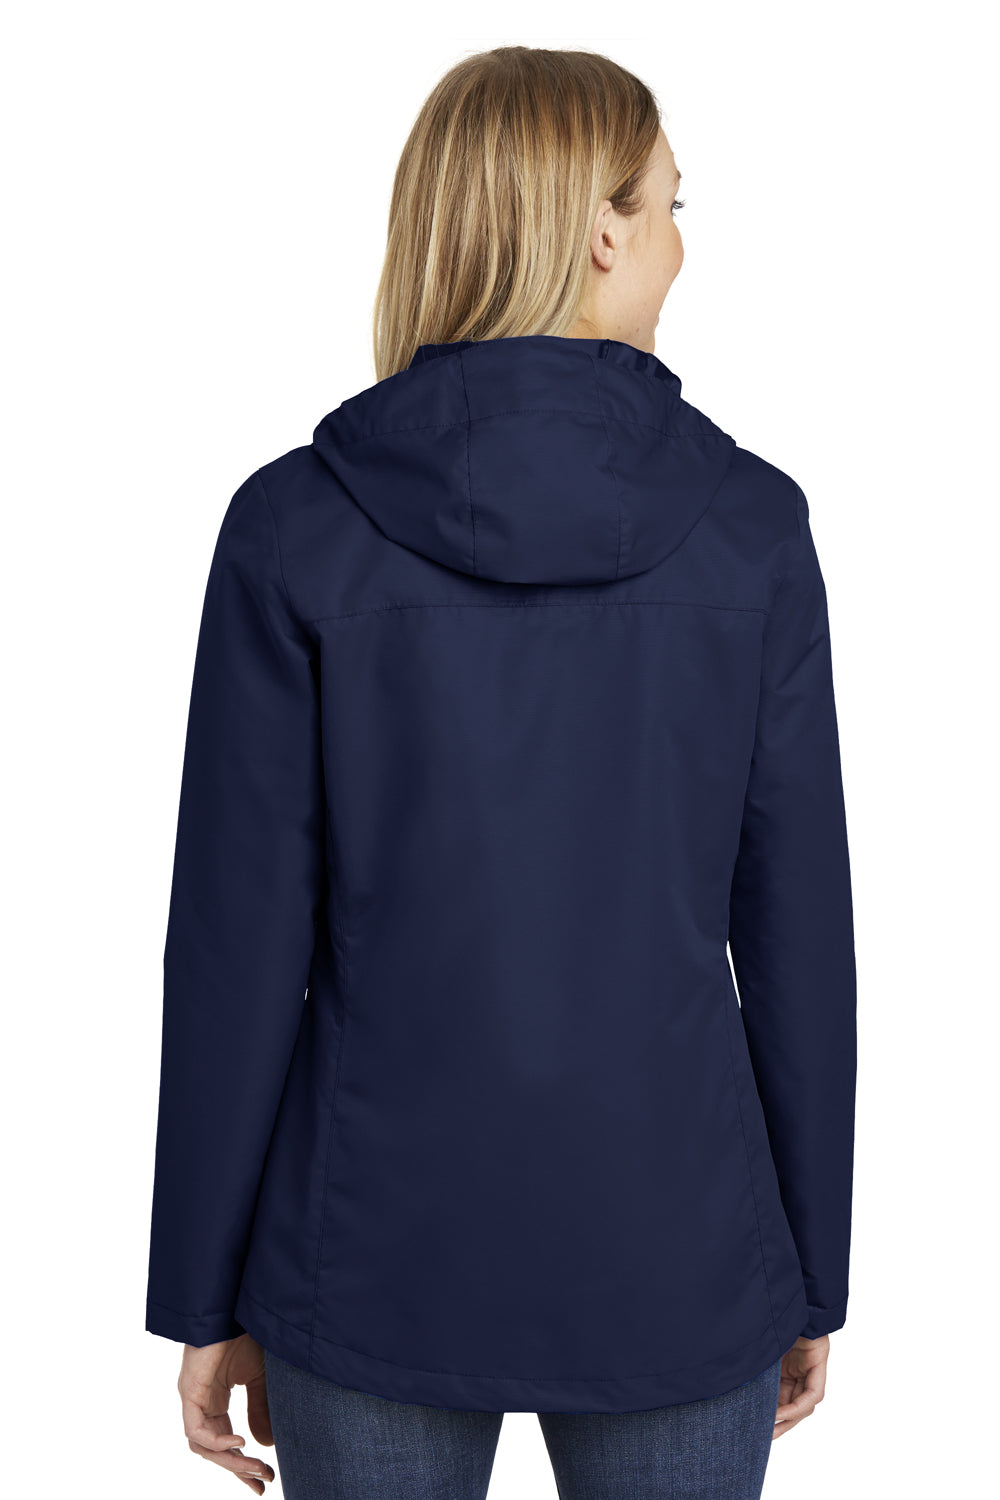 Port Authority L331 Womens All Conditions Waterproof Full Zip Hooded Jacket Navy Blue Back